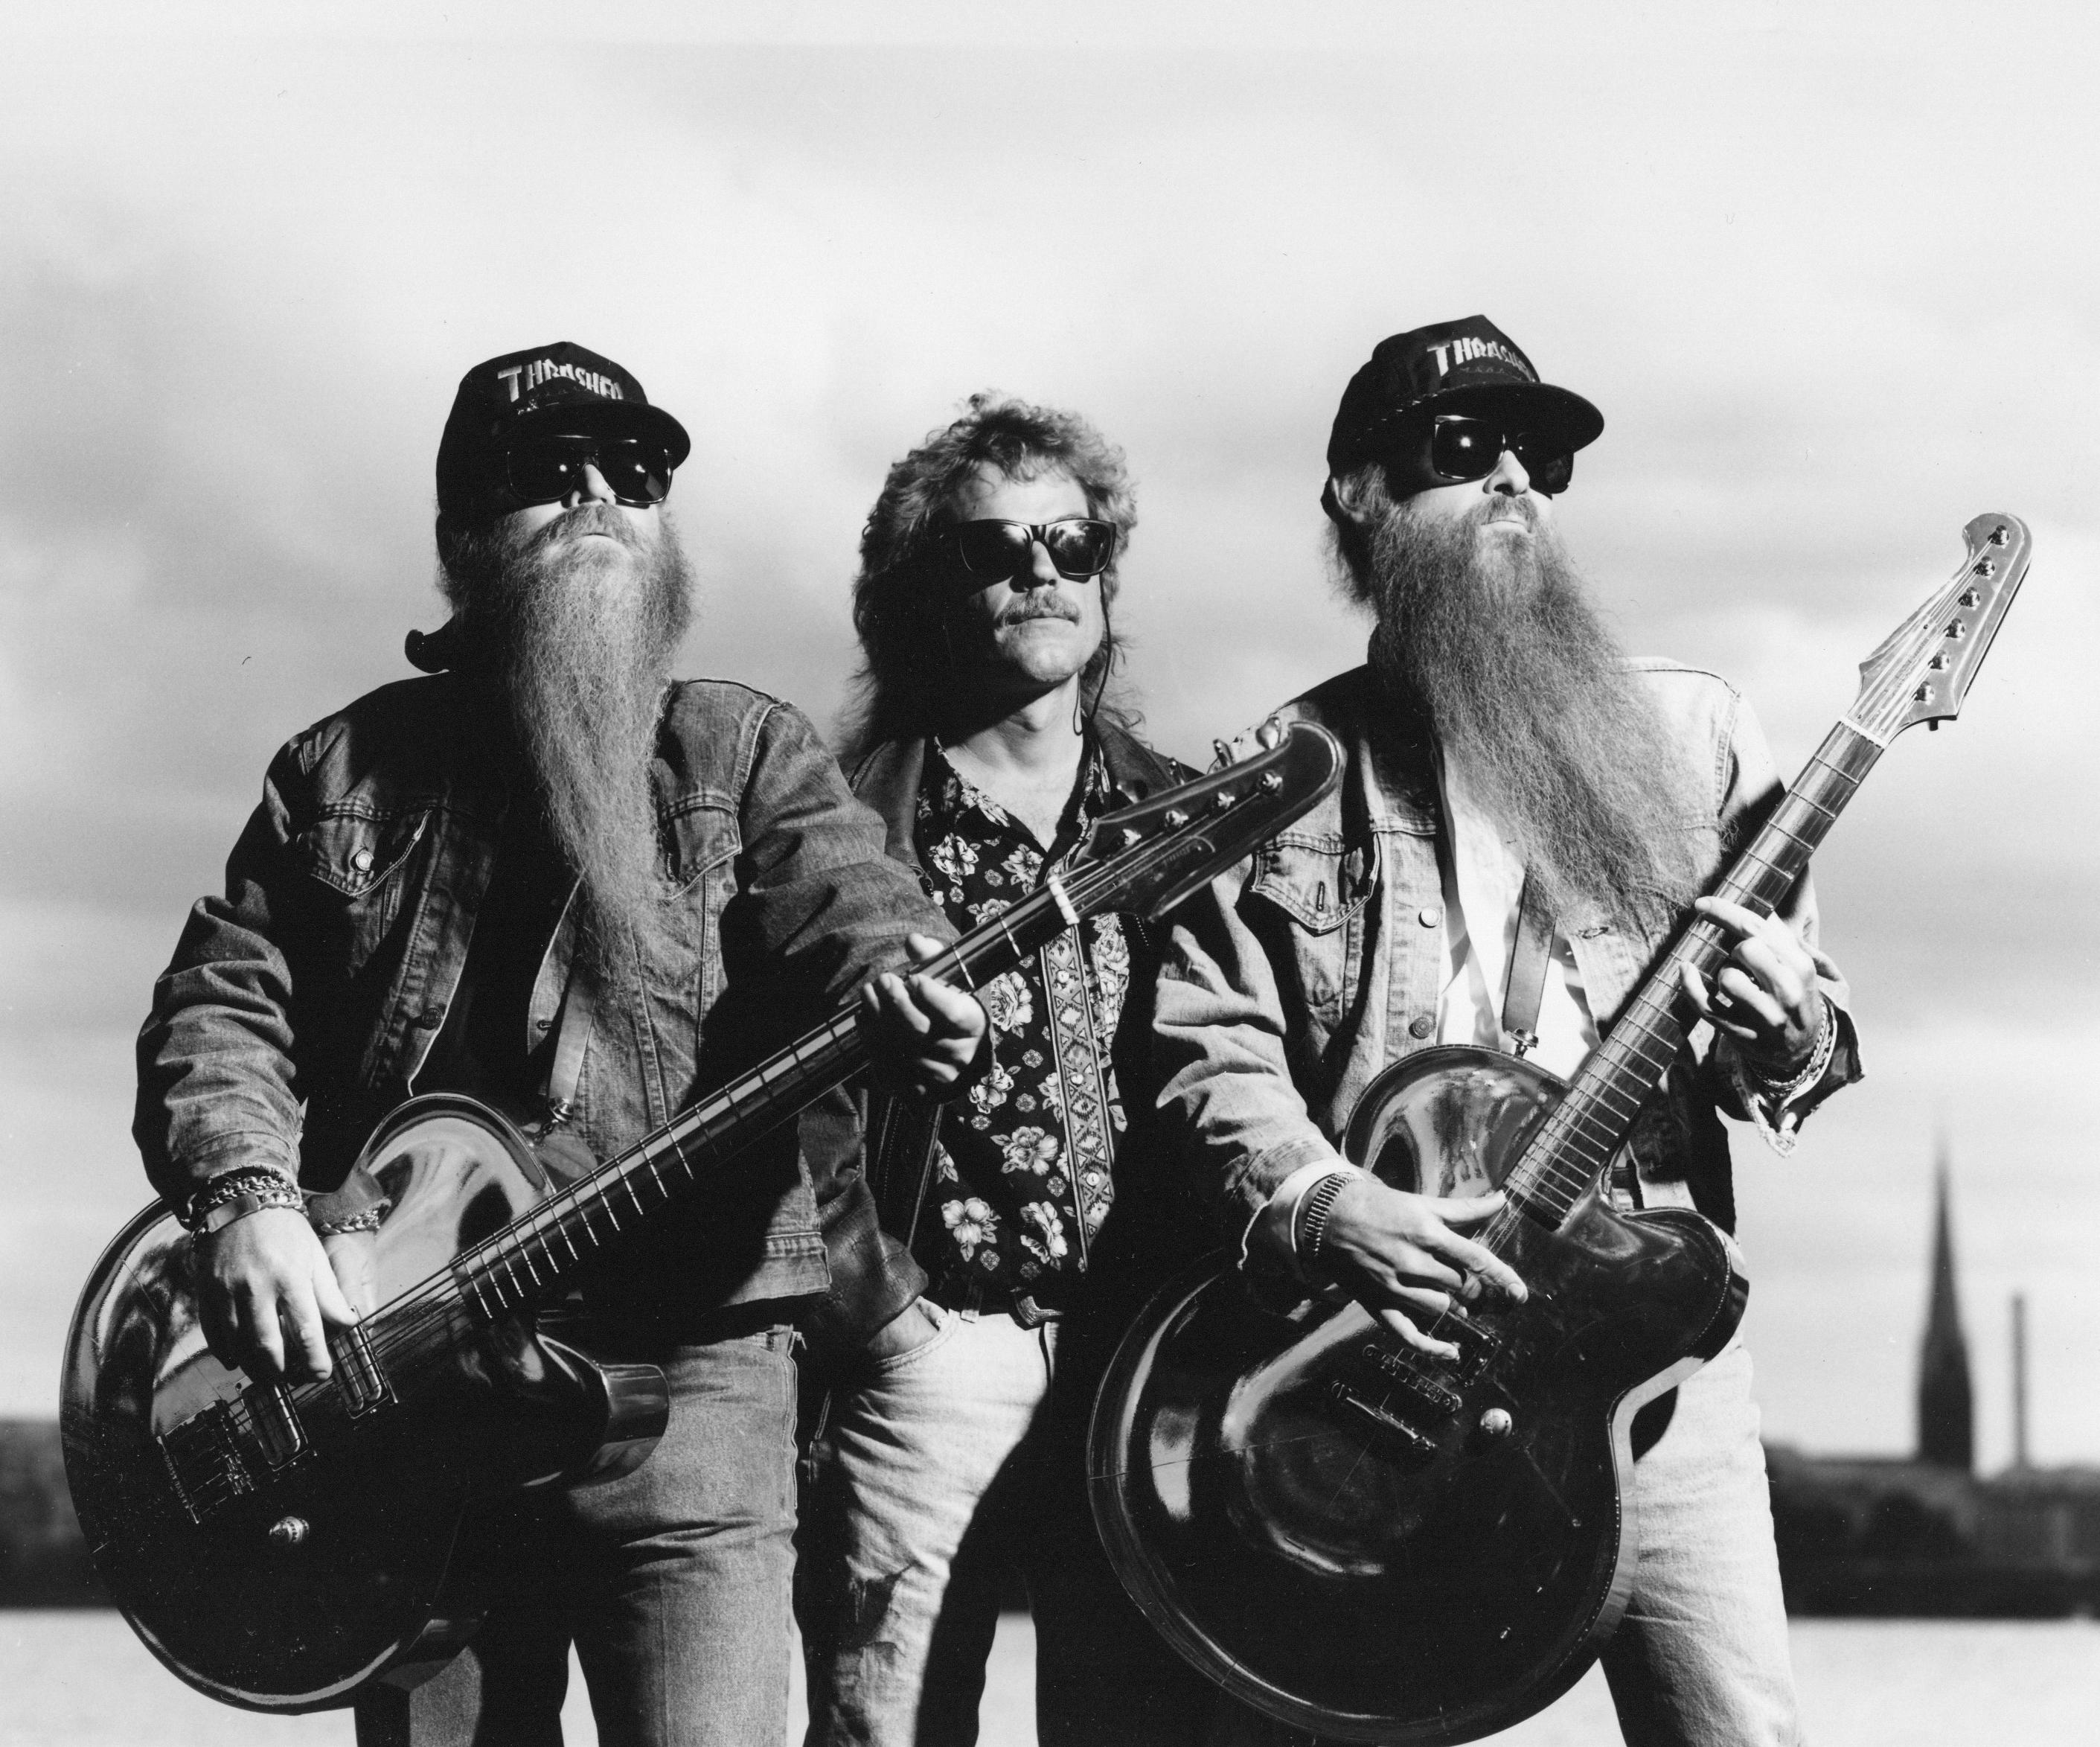 Unknown Black and White Photograph - ZZ Top Awesome Group Portrait Outdoors Vintage Original Photograph